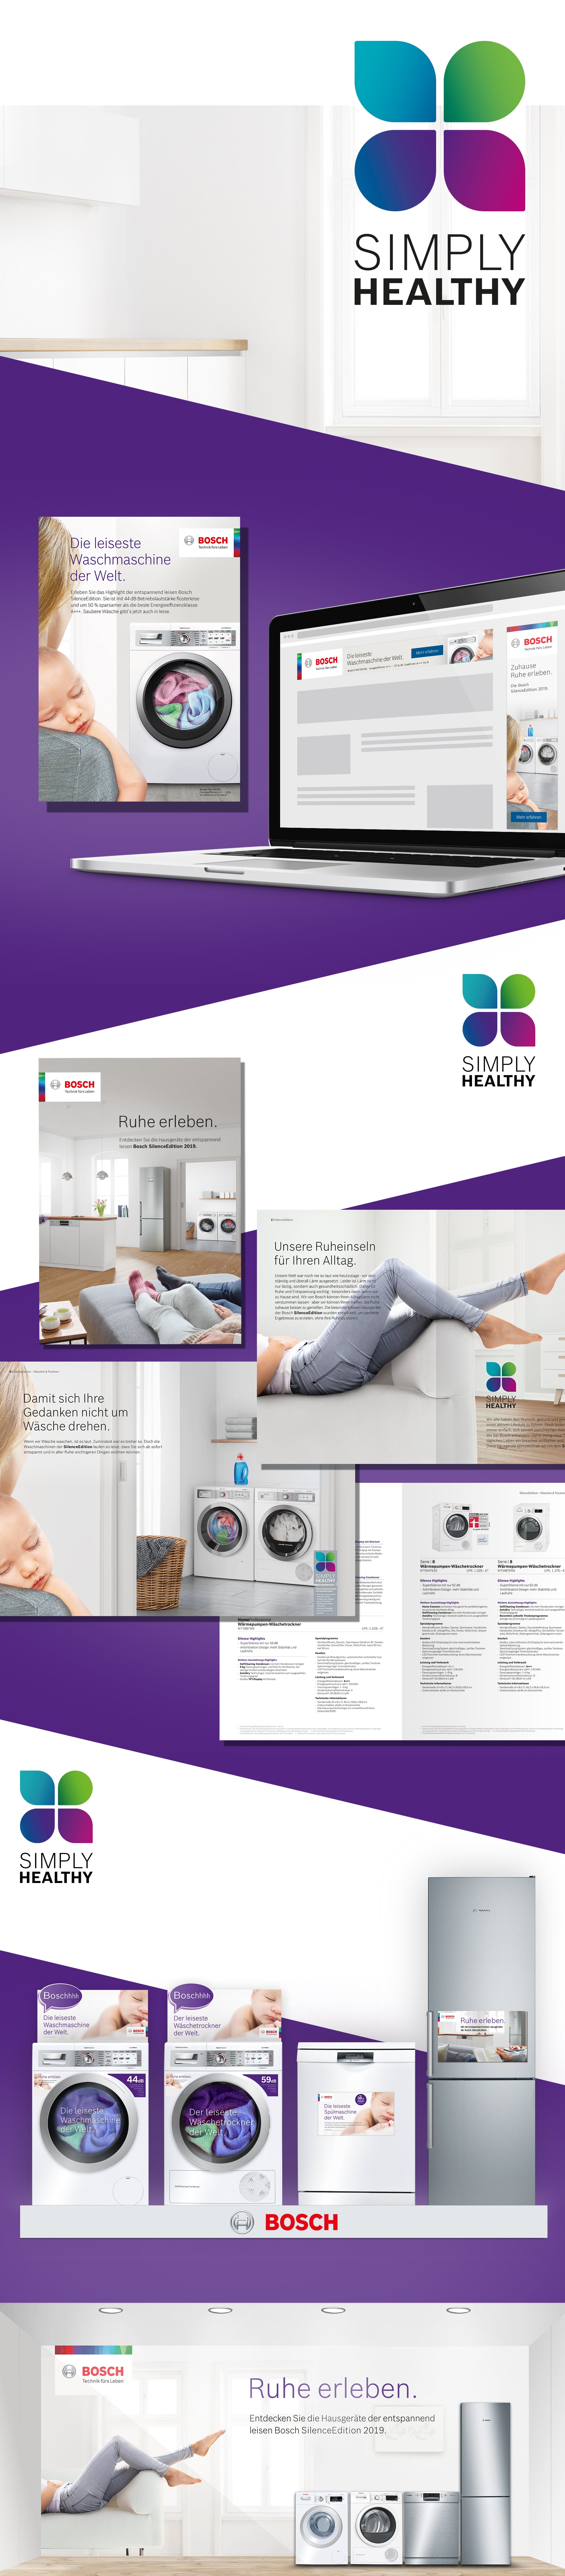 Case Bosch BSH Simply Health Campagne